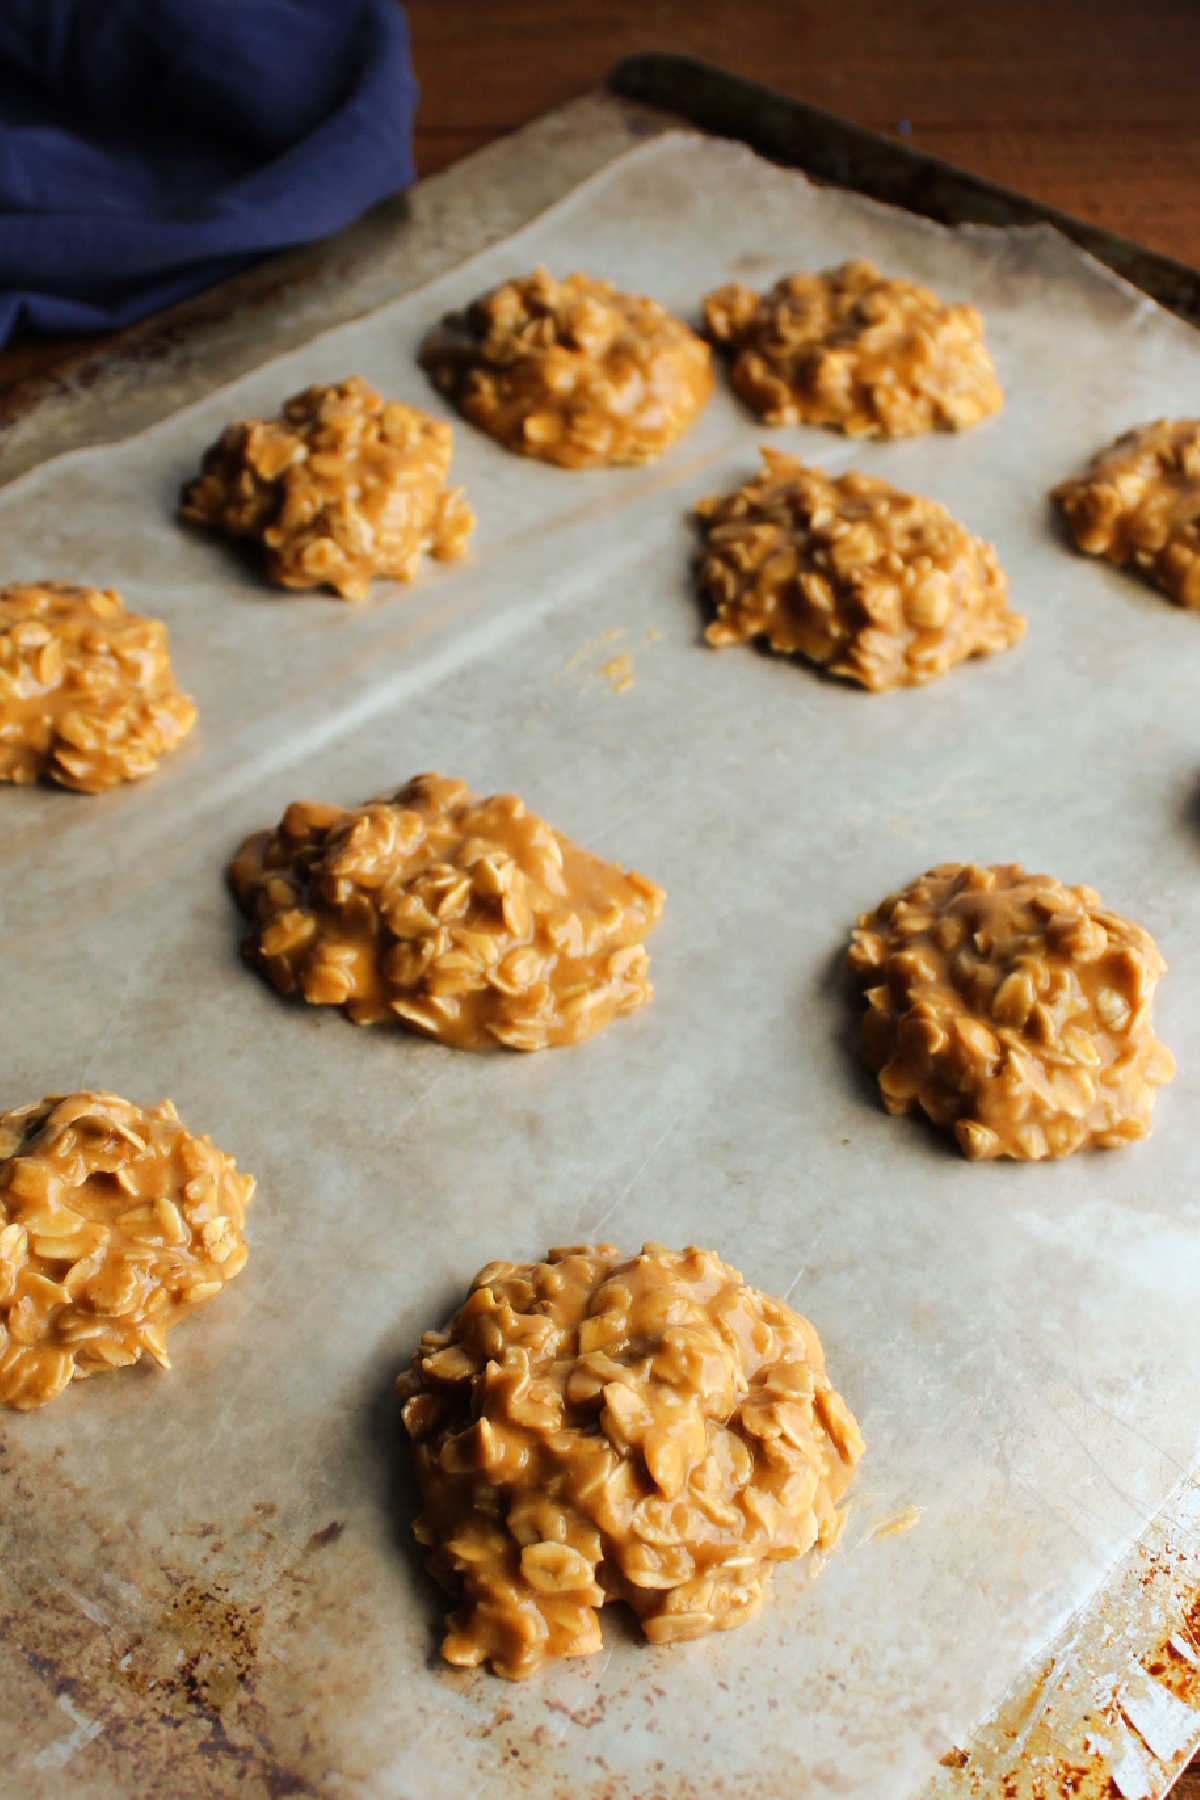 Peanut butter no bake cookies setting up on a wax paper lined cookie sheet.